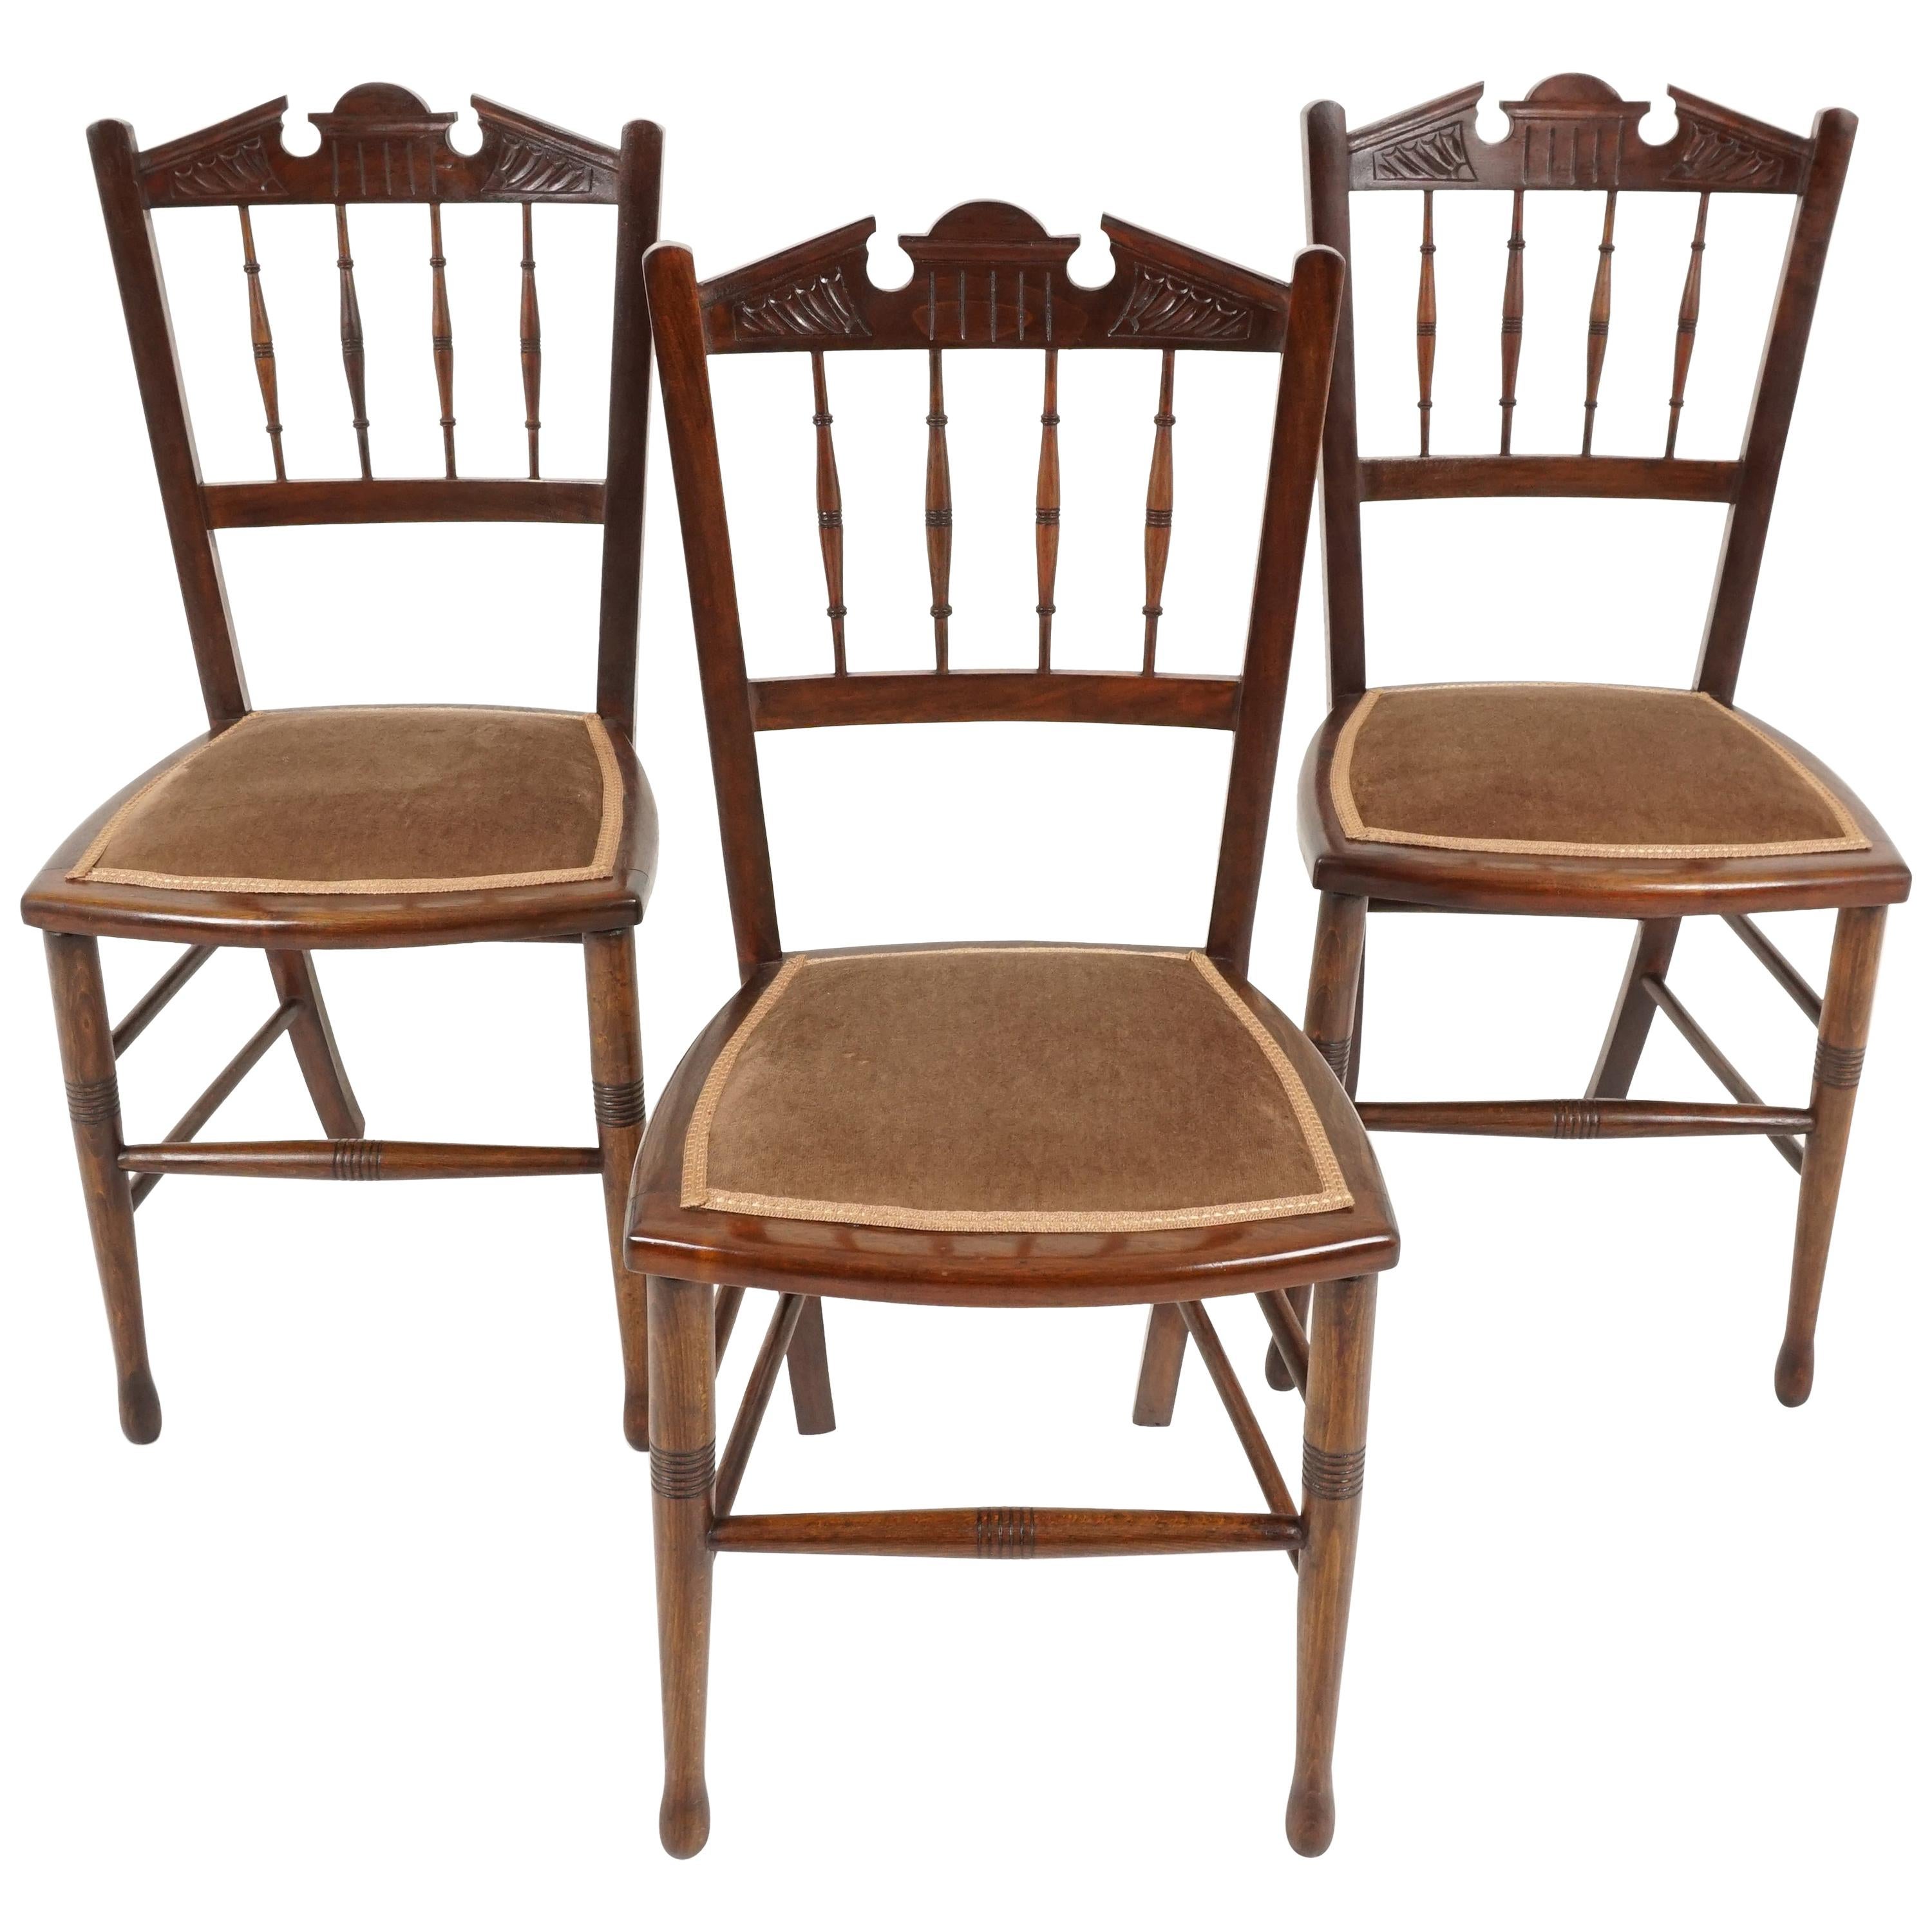 Three Antique Chairs, Walnut Upholstered Bedroom Chairs, Scotland 1900, B2227